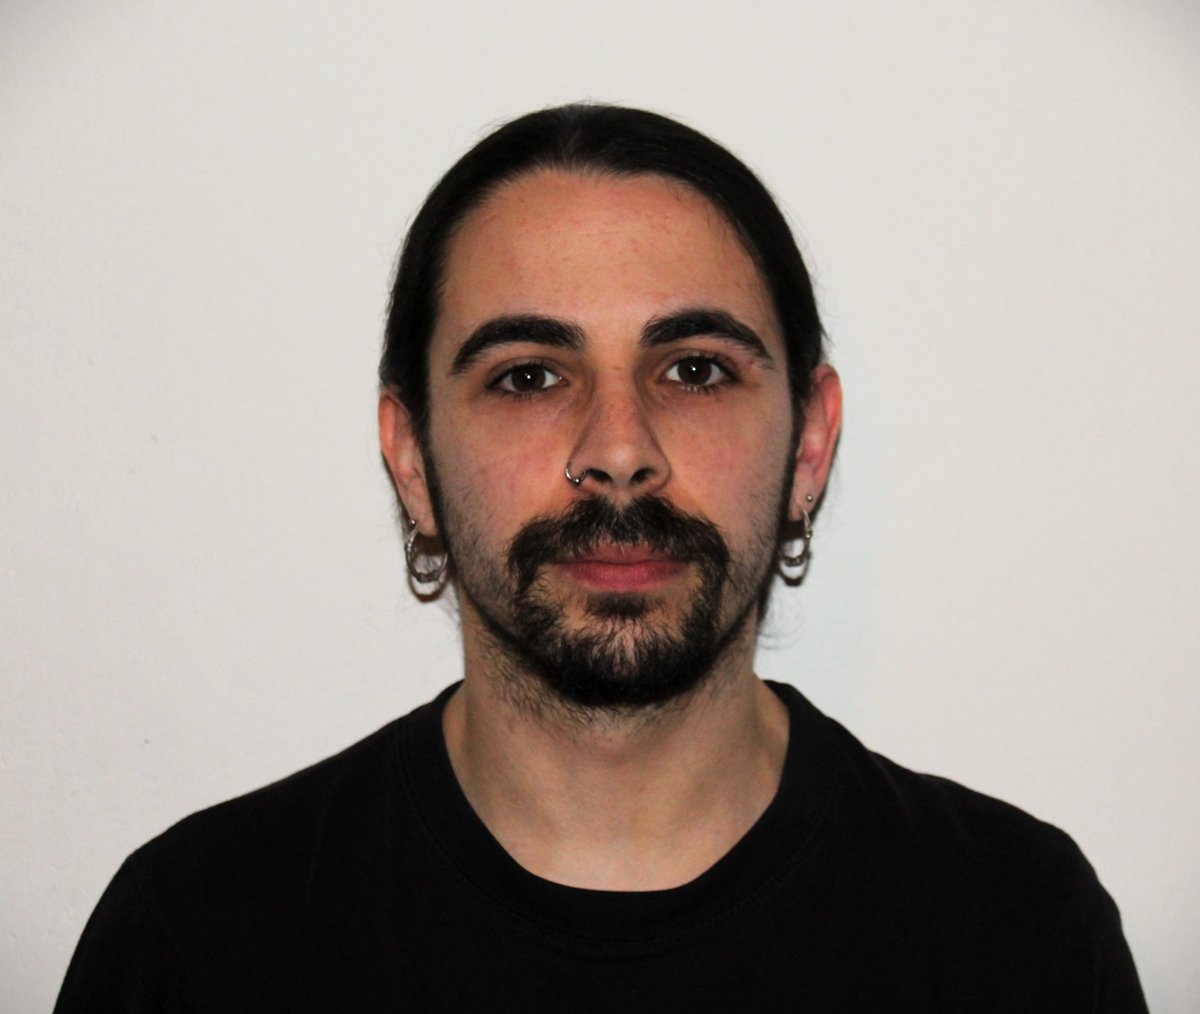 Welcome to Daniele who will be our first 'TURBOPACKER' officially hired to work on the PRIN PNRR funded project “Thorough Upcycling of Rice waste biomass into BiOactive PACKaging via chemoenzymatic processes (TURBOPACK)! @AleVPellis  #biocatalysis #flowbiocatalysis #greenchem